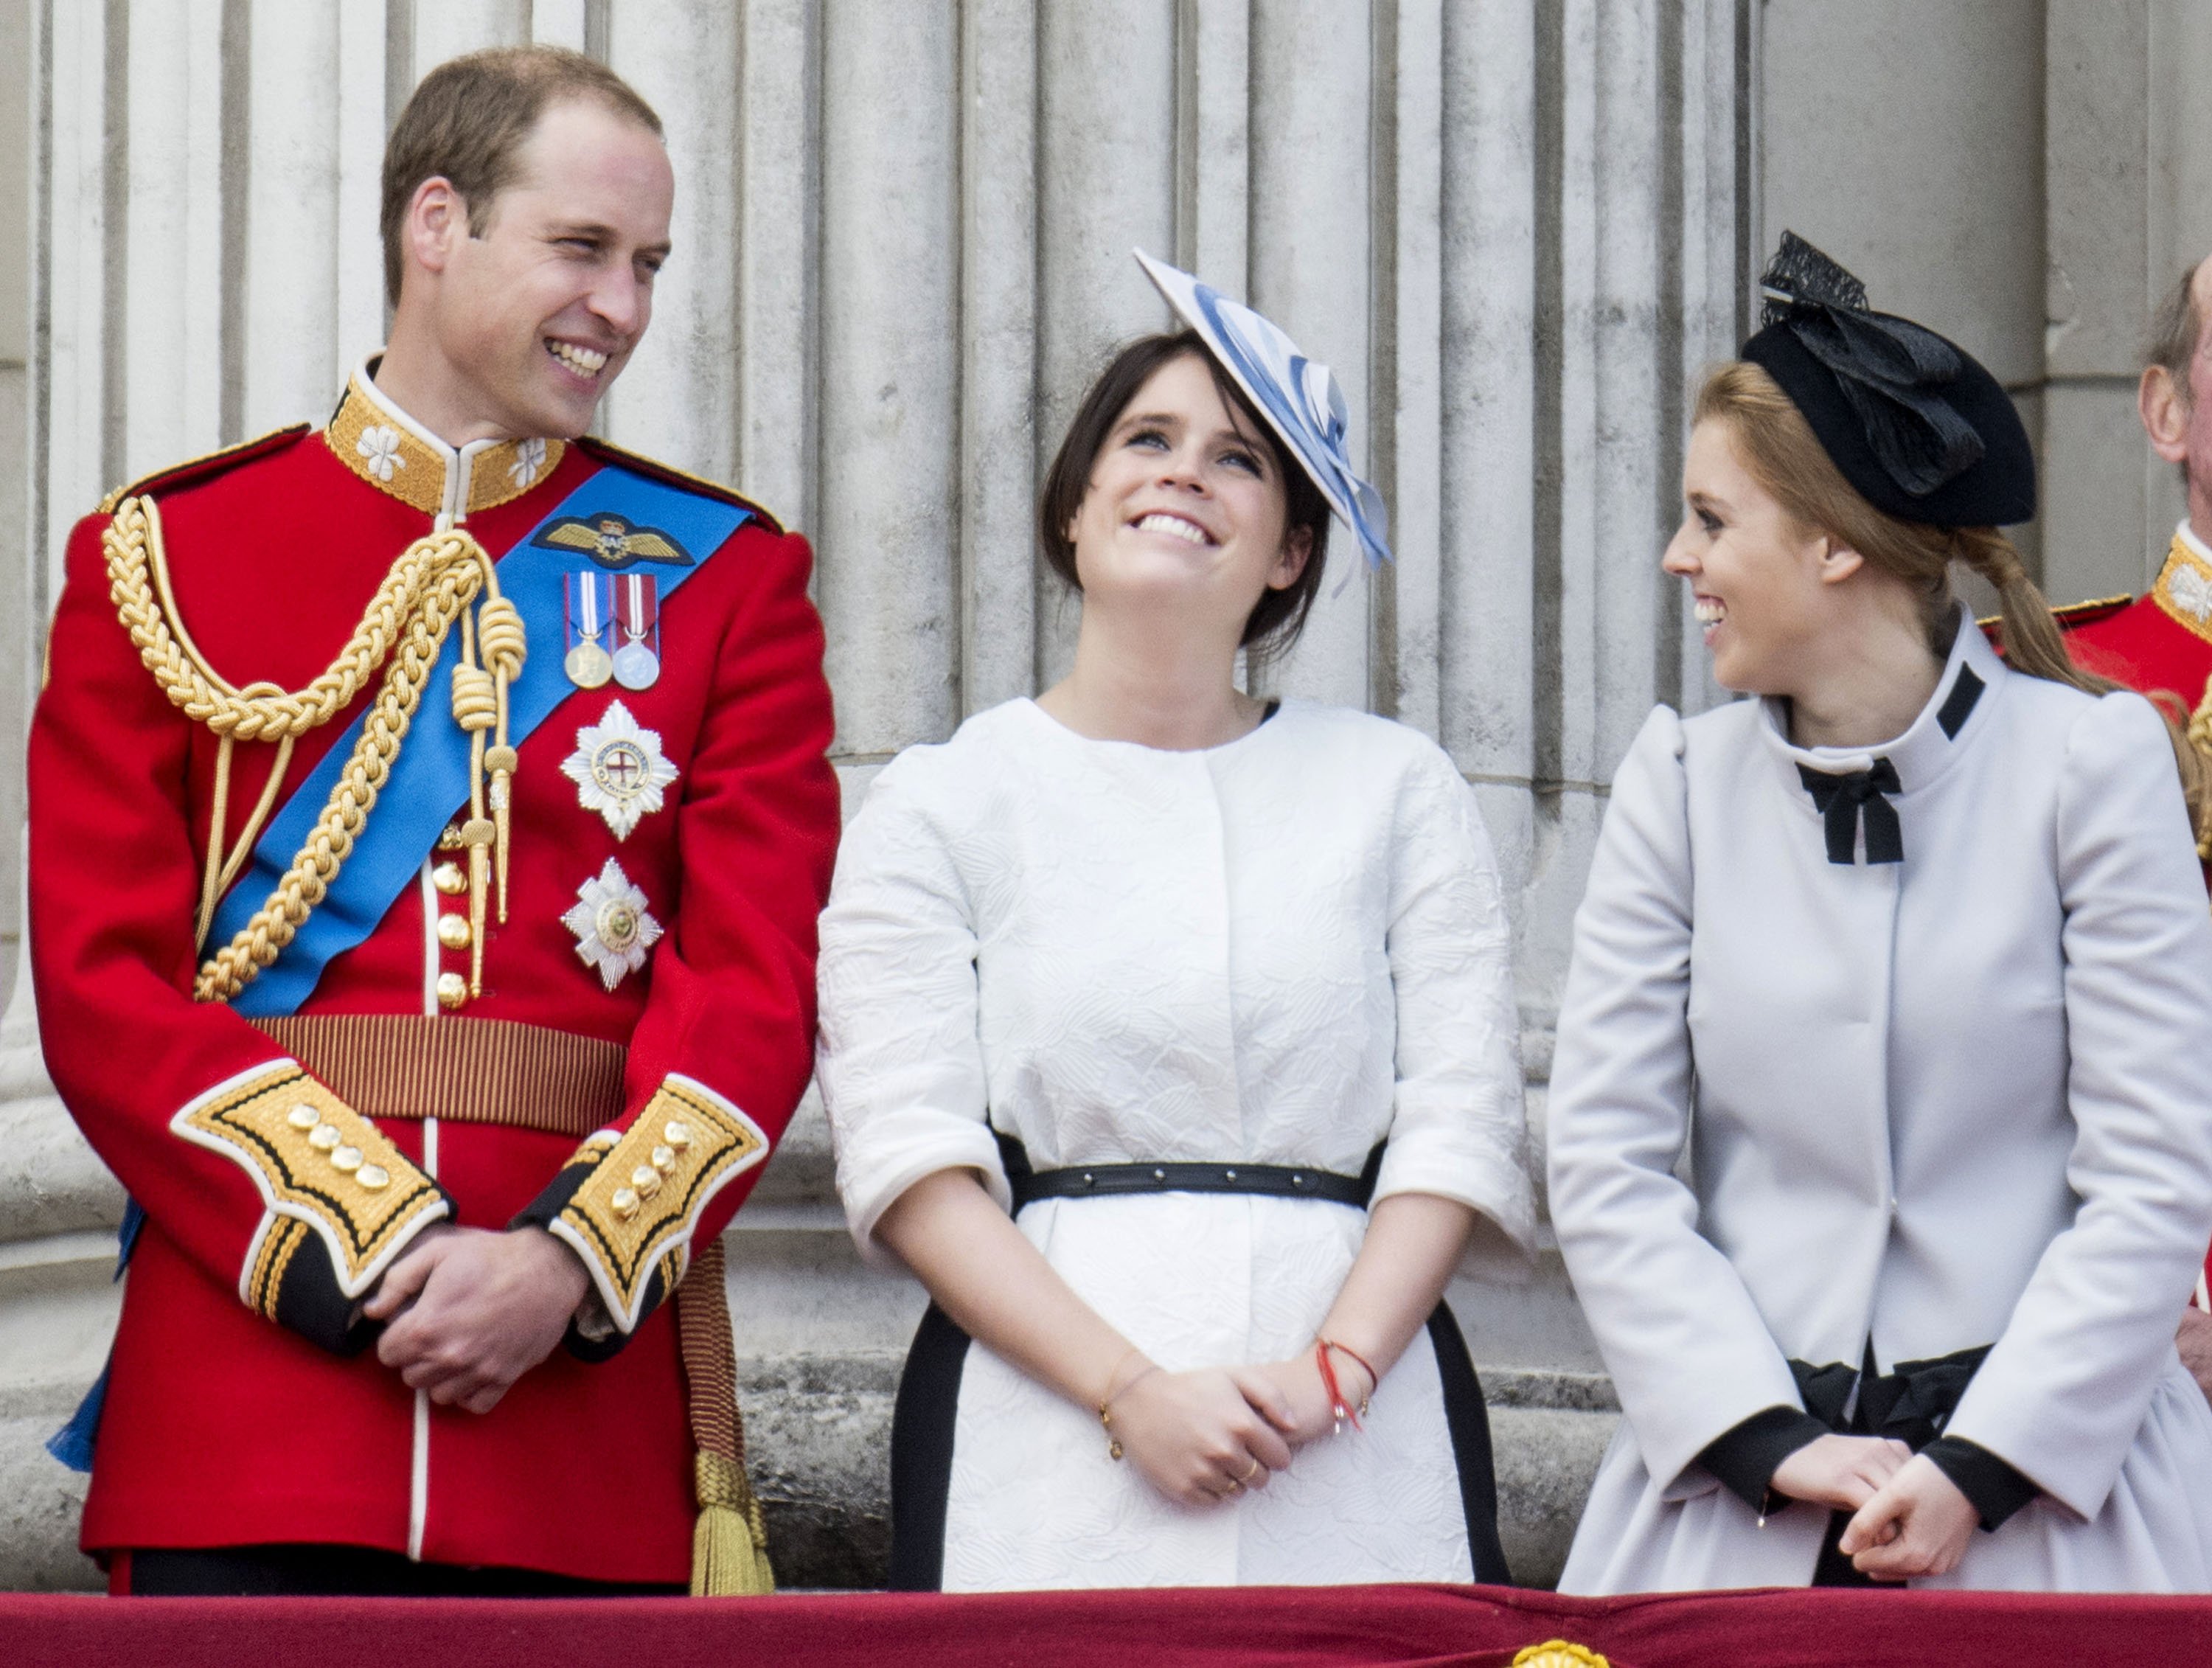  Prince William with Princesses Eugenie and Beatrice during the annual Trooping The Colour ceremony at Buckingham Palace on June 15, 2013 in London, England. | Source: Getty Images